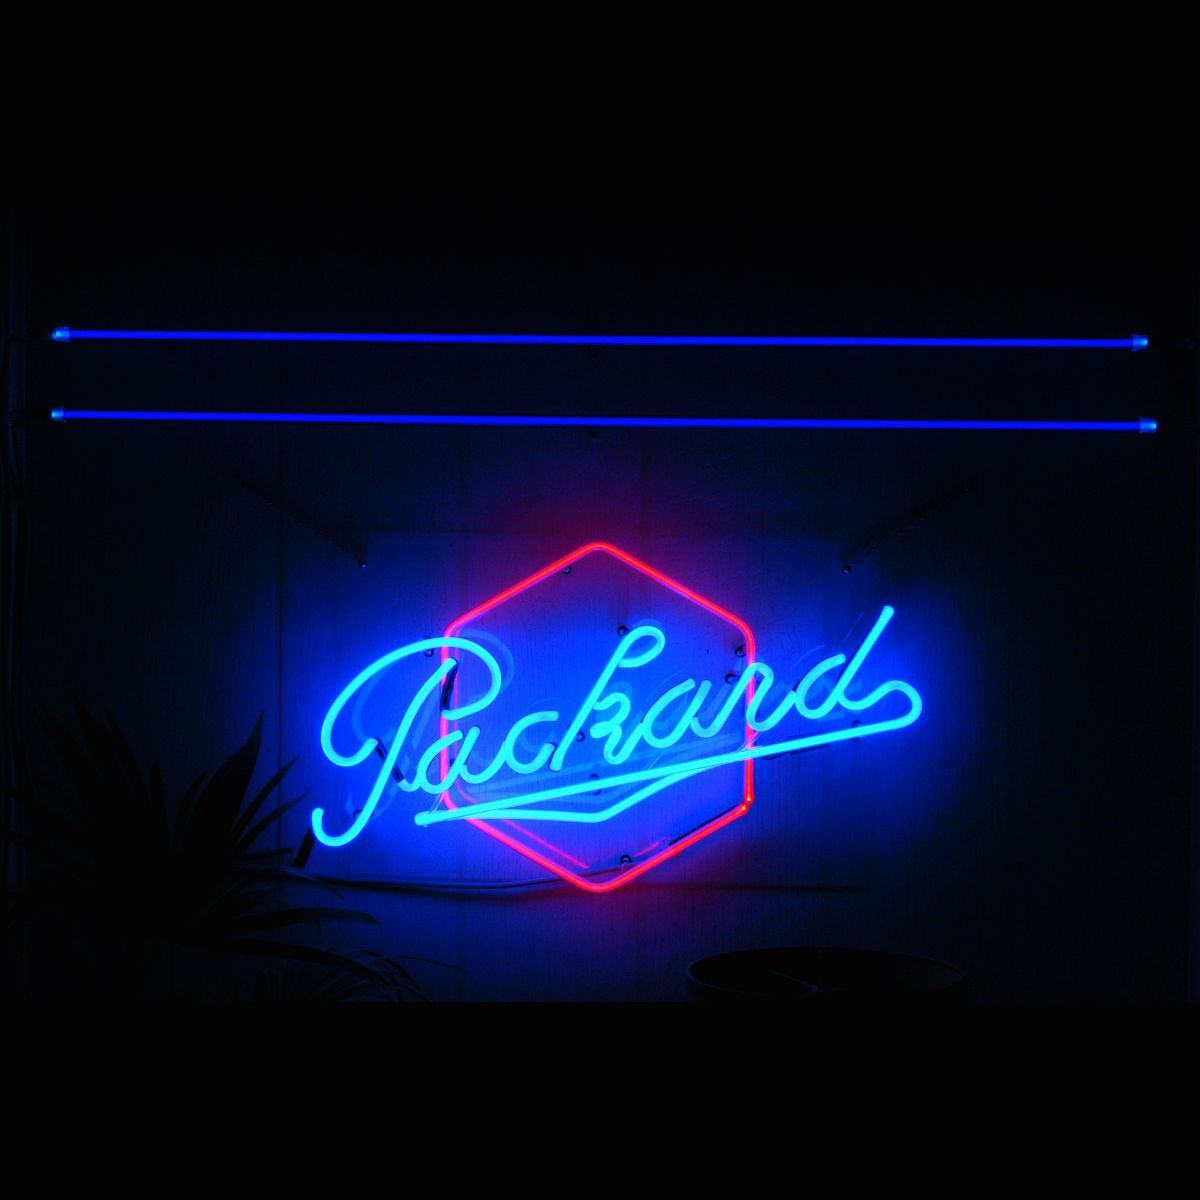 resized Packard neon sign with blue neon stripes.jpg